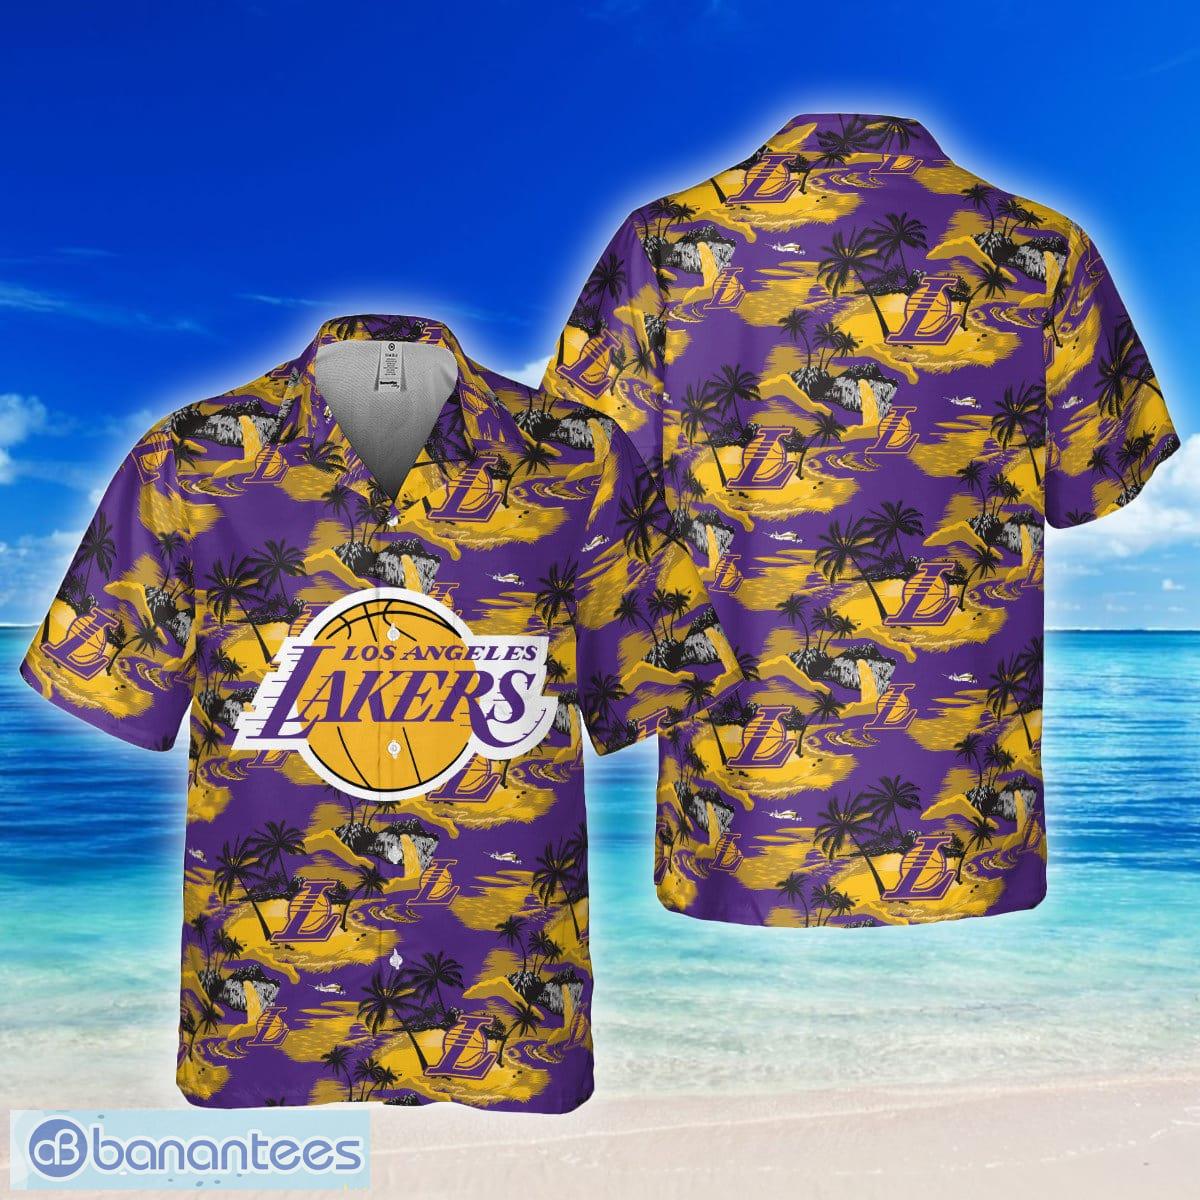 floral lakers jersey